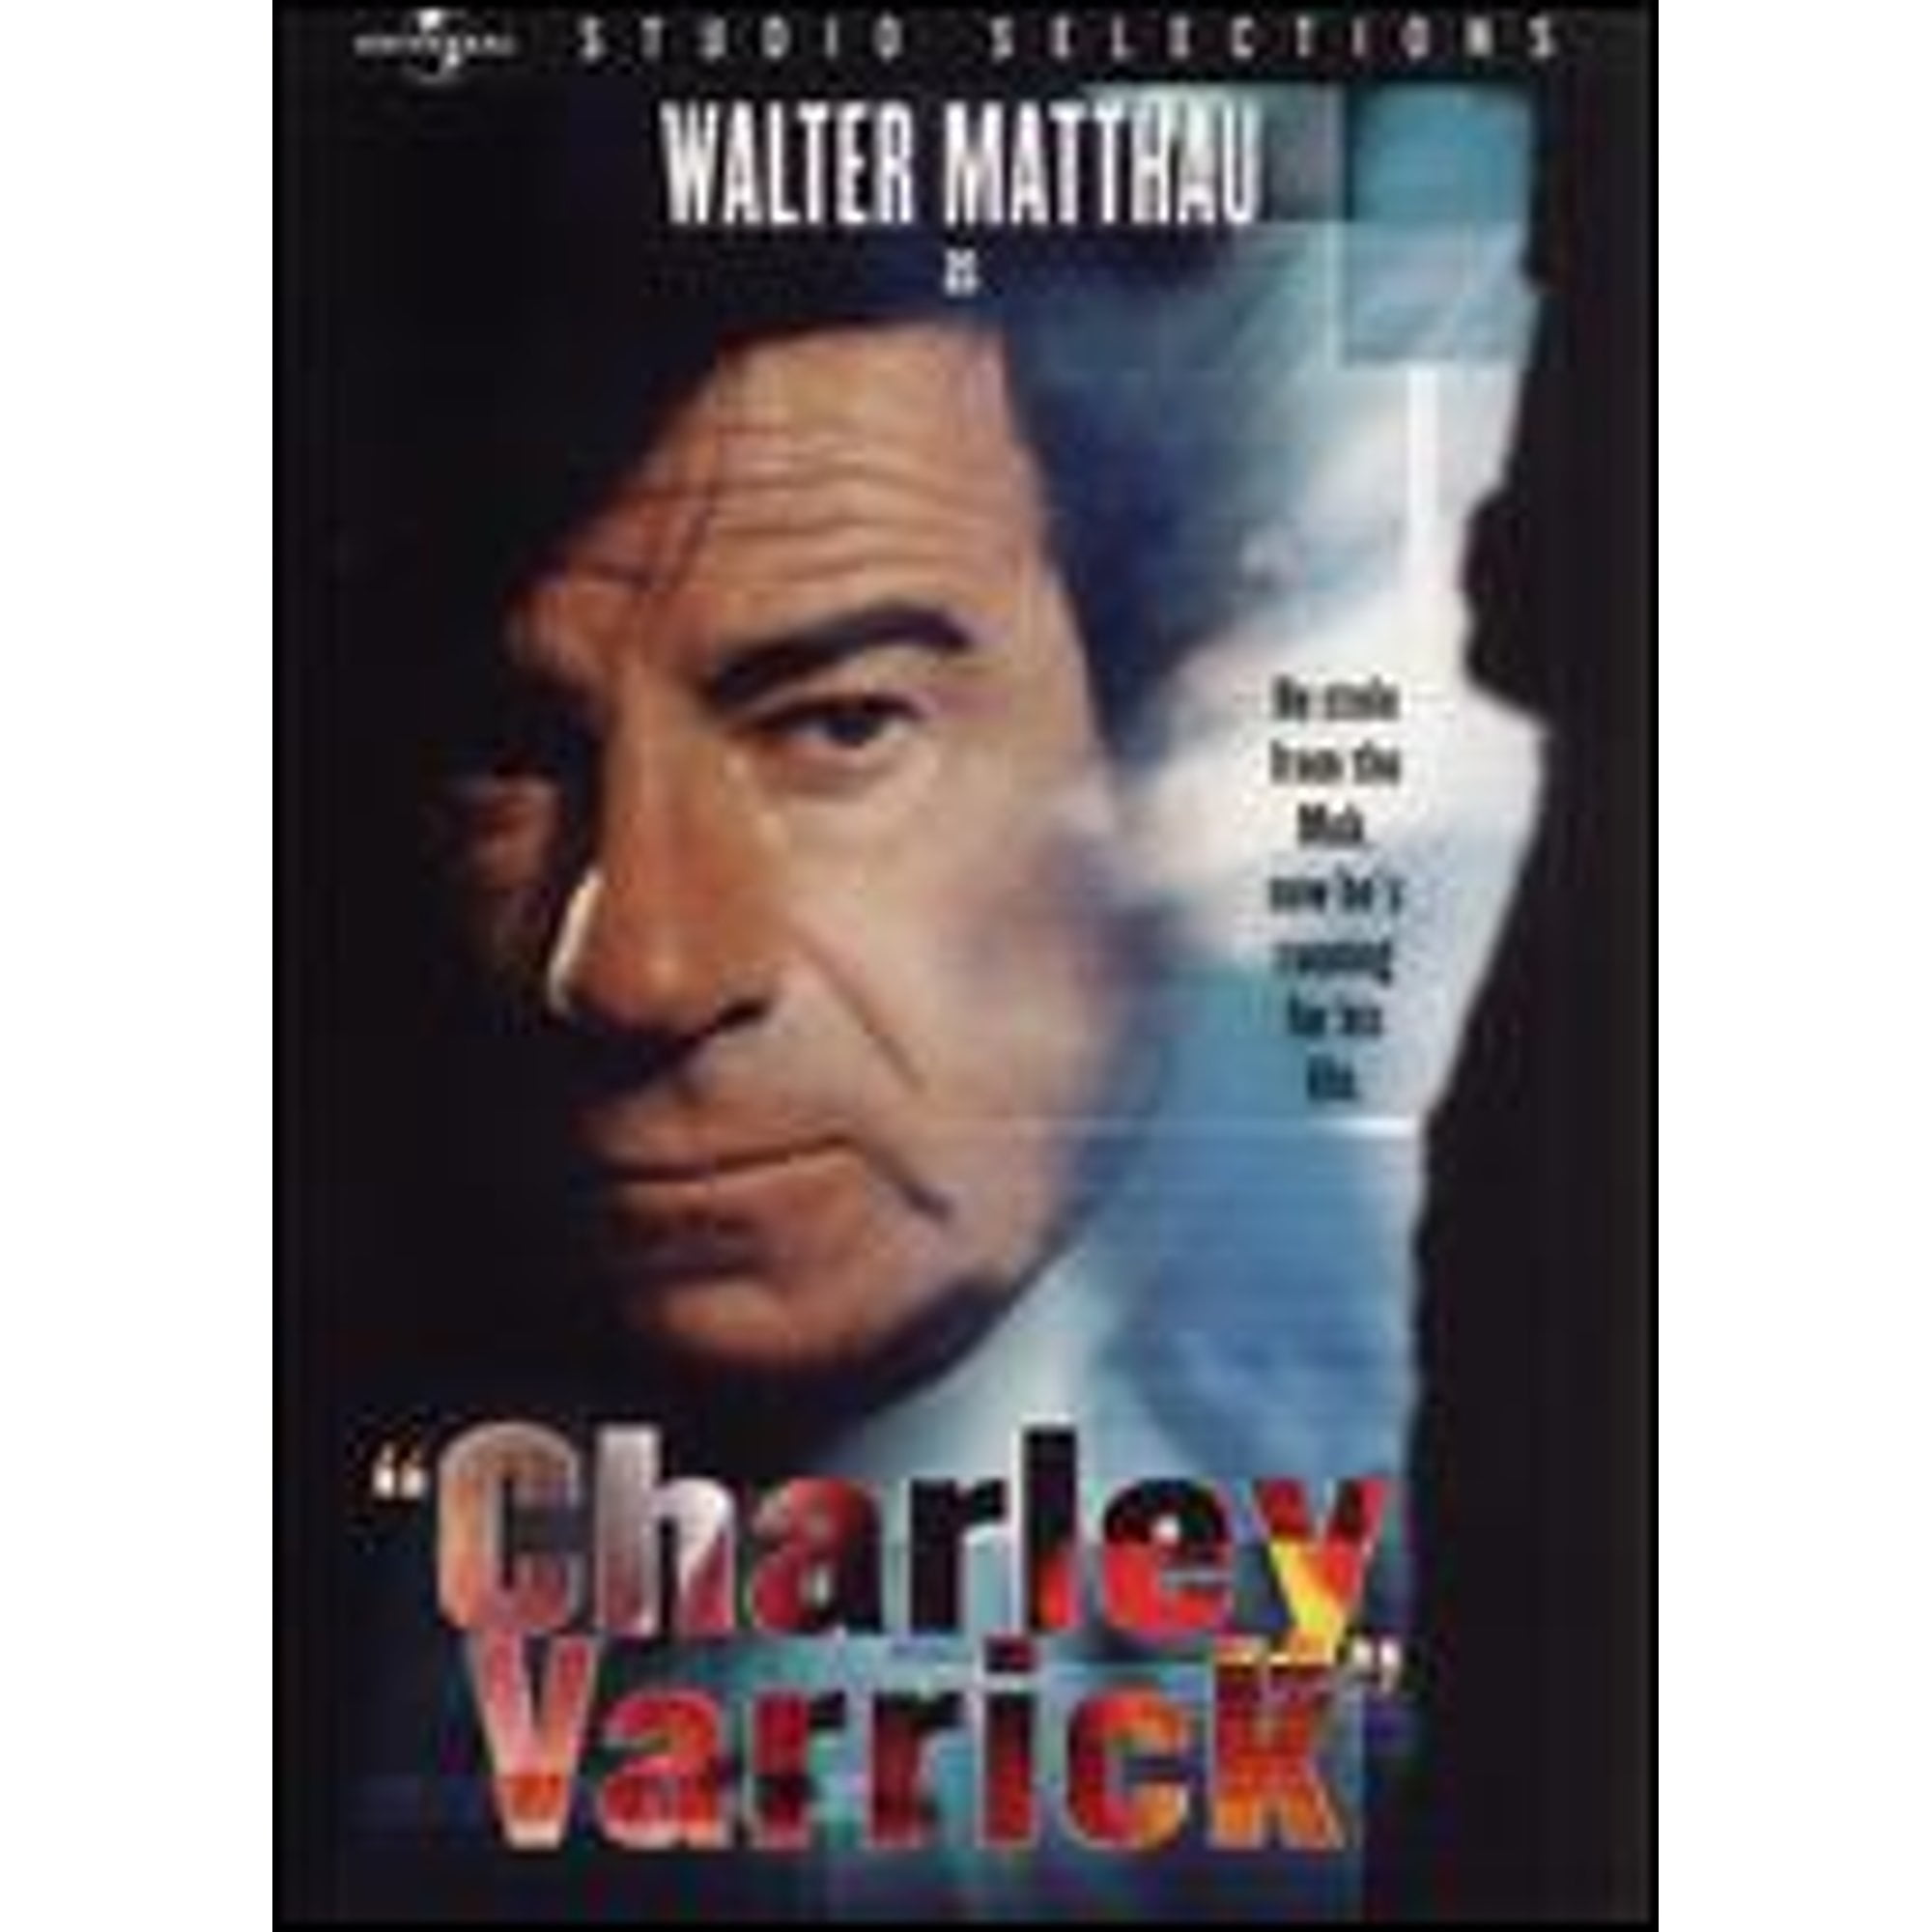 Pre-Owned Charley Varrick (DVD 0025192620324) directed by Don Siegel